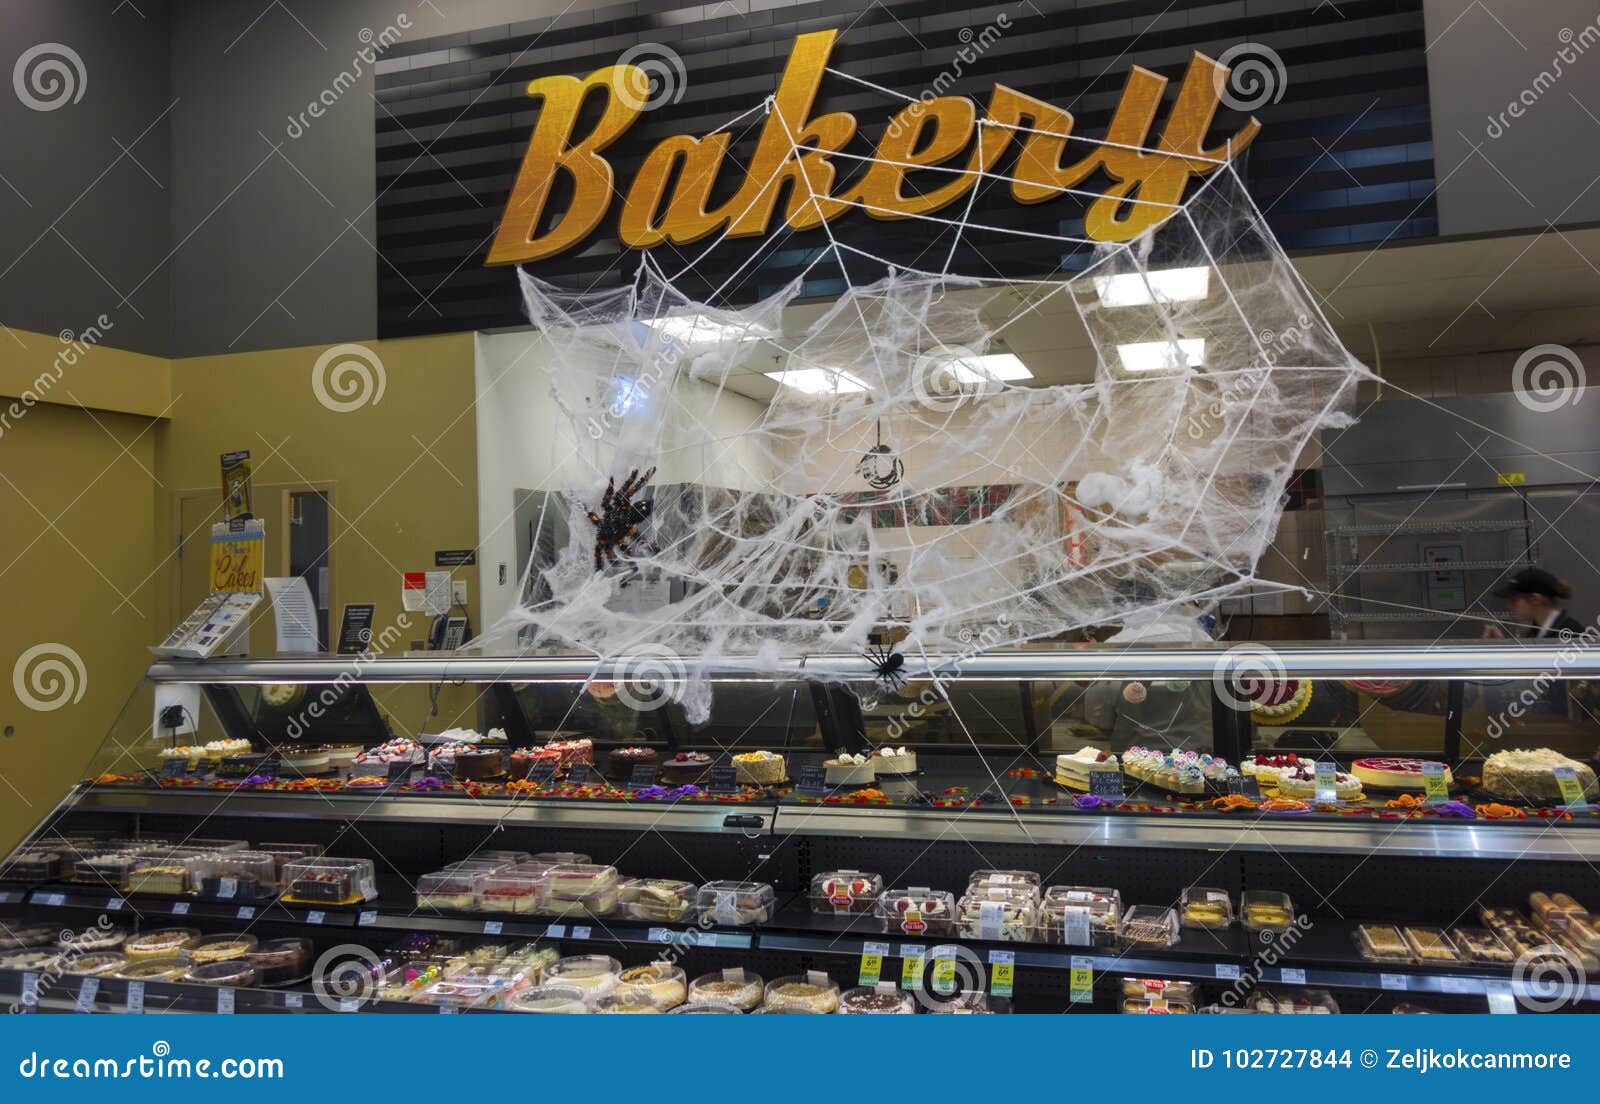 Bakery Store with Halloween Decoration Editorial Stock Image ...